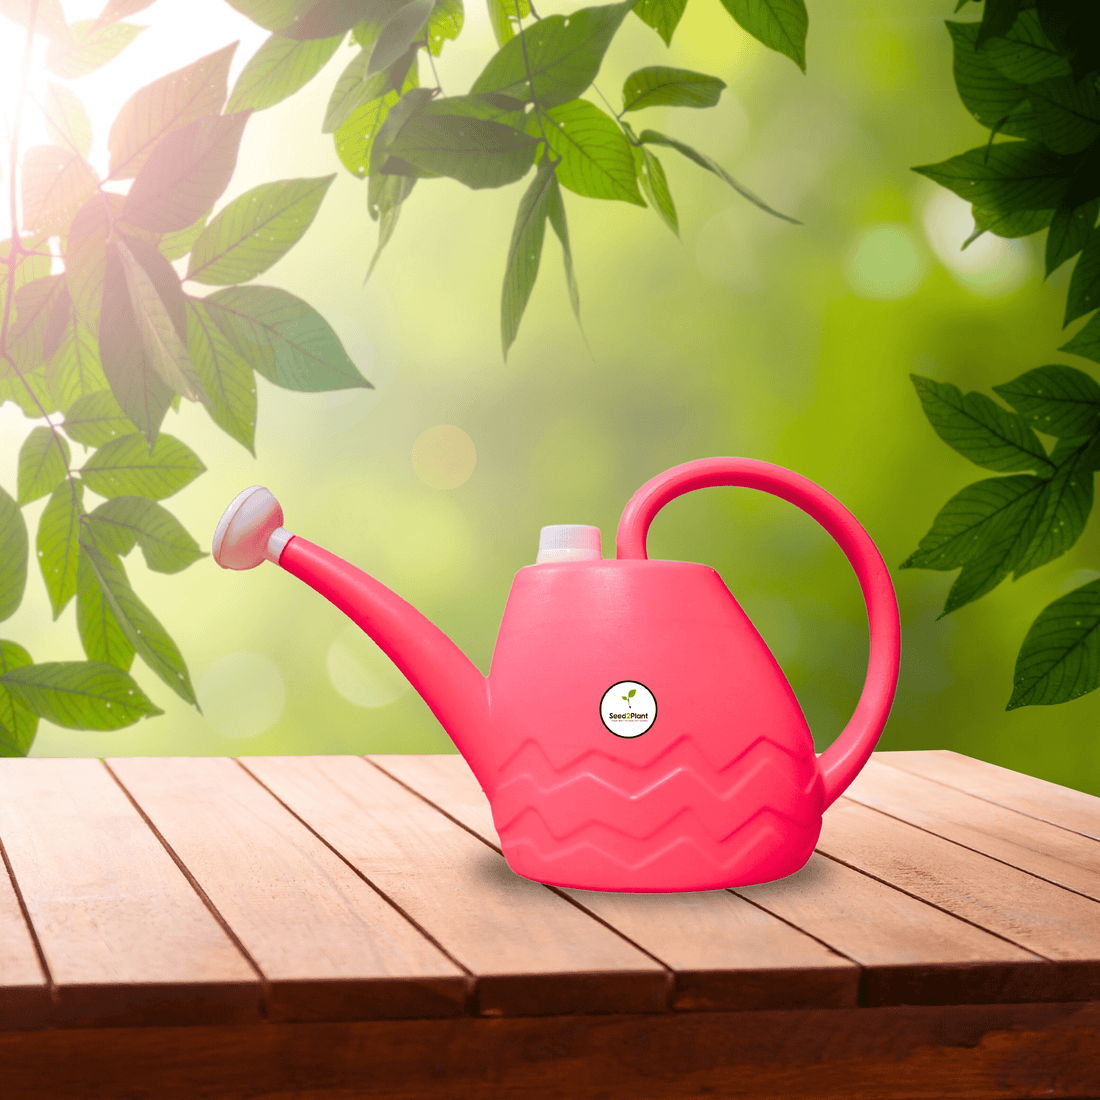 Efficient 2L Watering Can for Lush Indian Gardens – Easy Grip, Long-Lasting